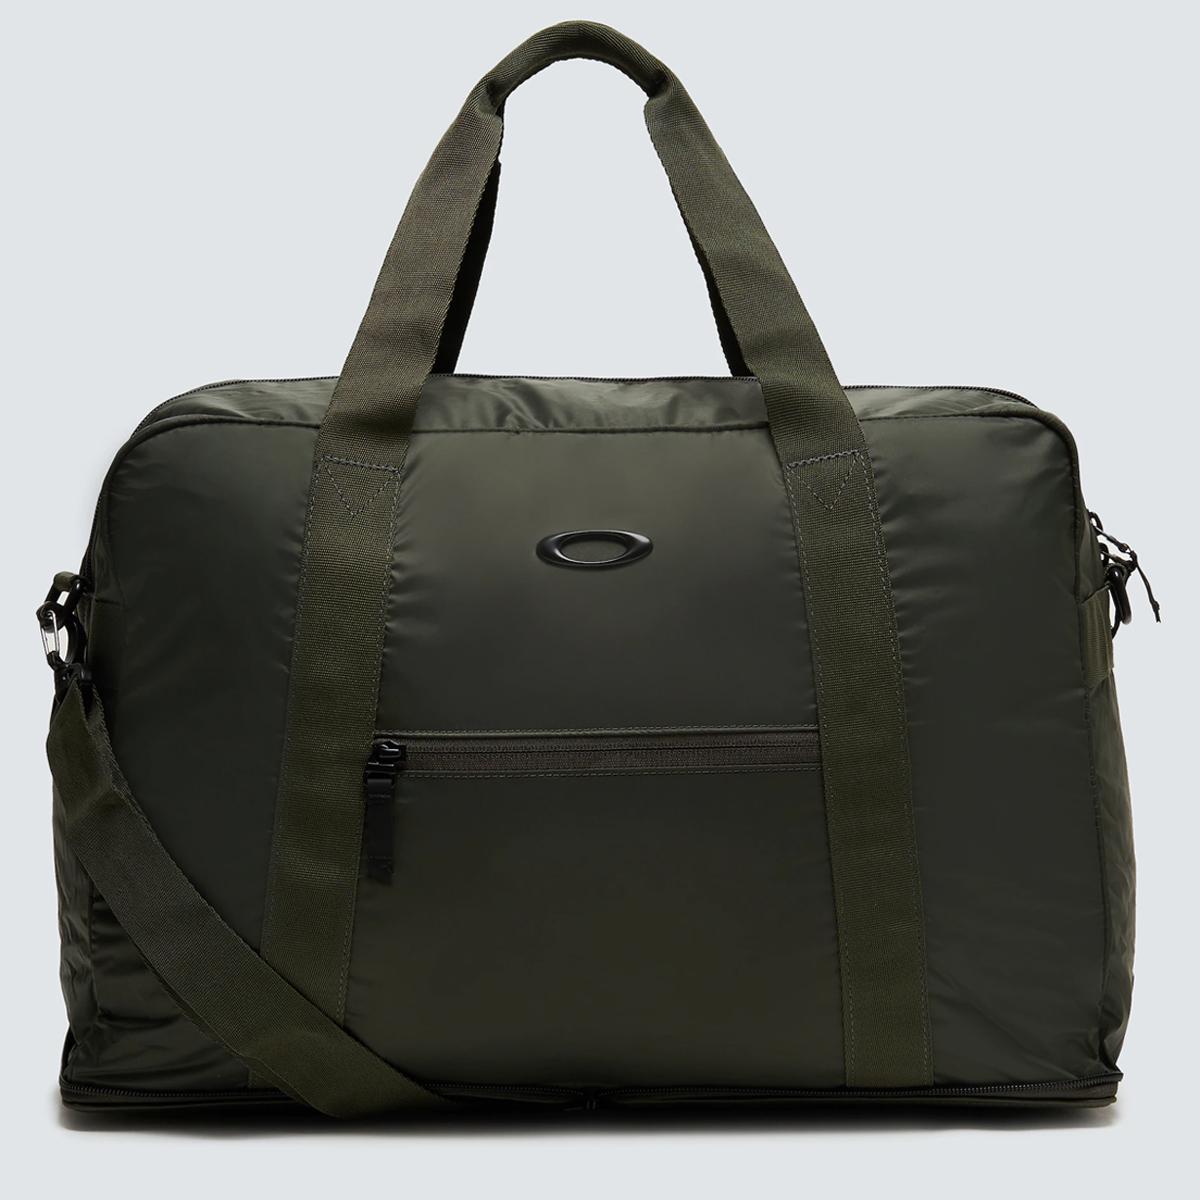 38L Oakley Packable Duffle Bag for $27.50 Shipped